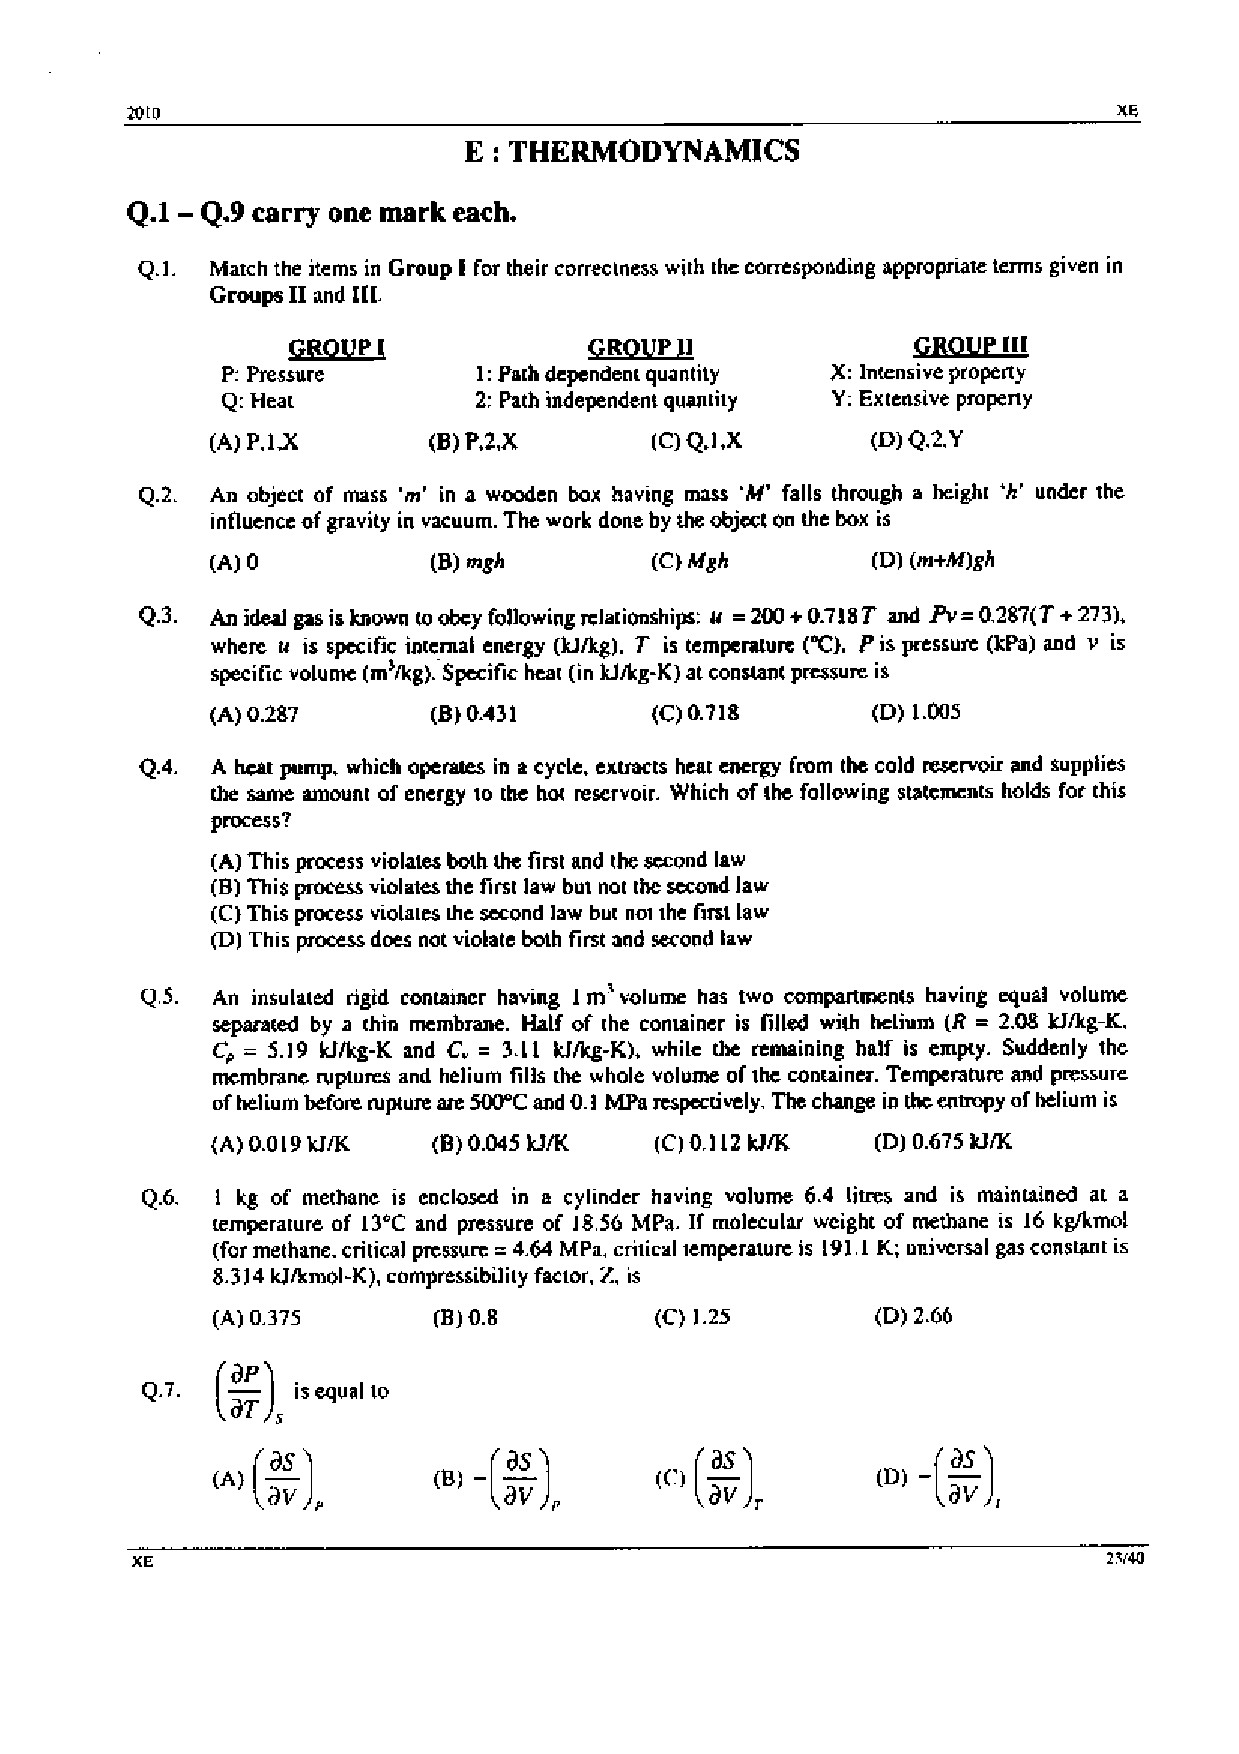 GATE Exam Question Paper 2010 Engineering Sciences 23